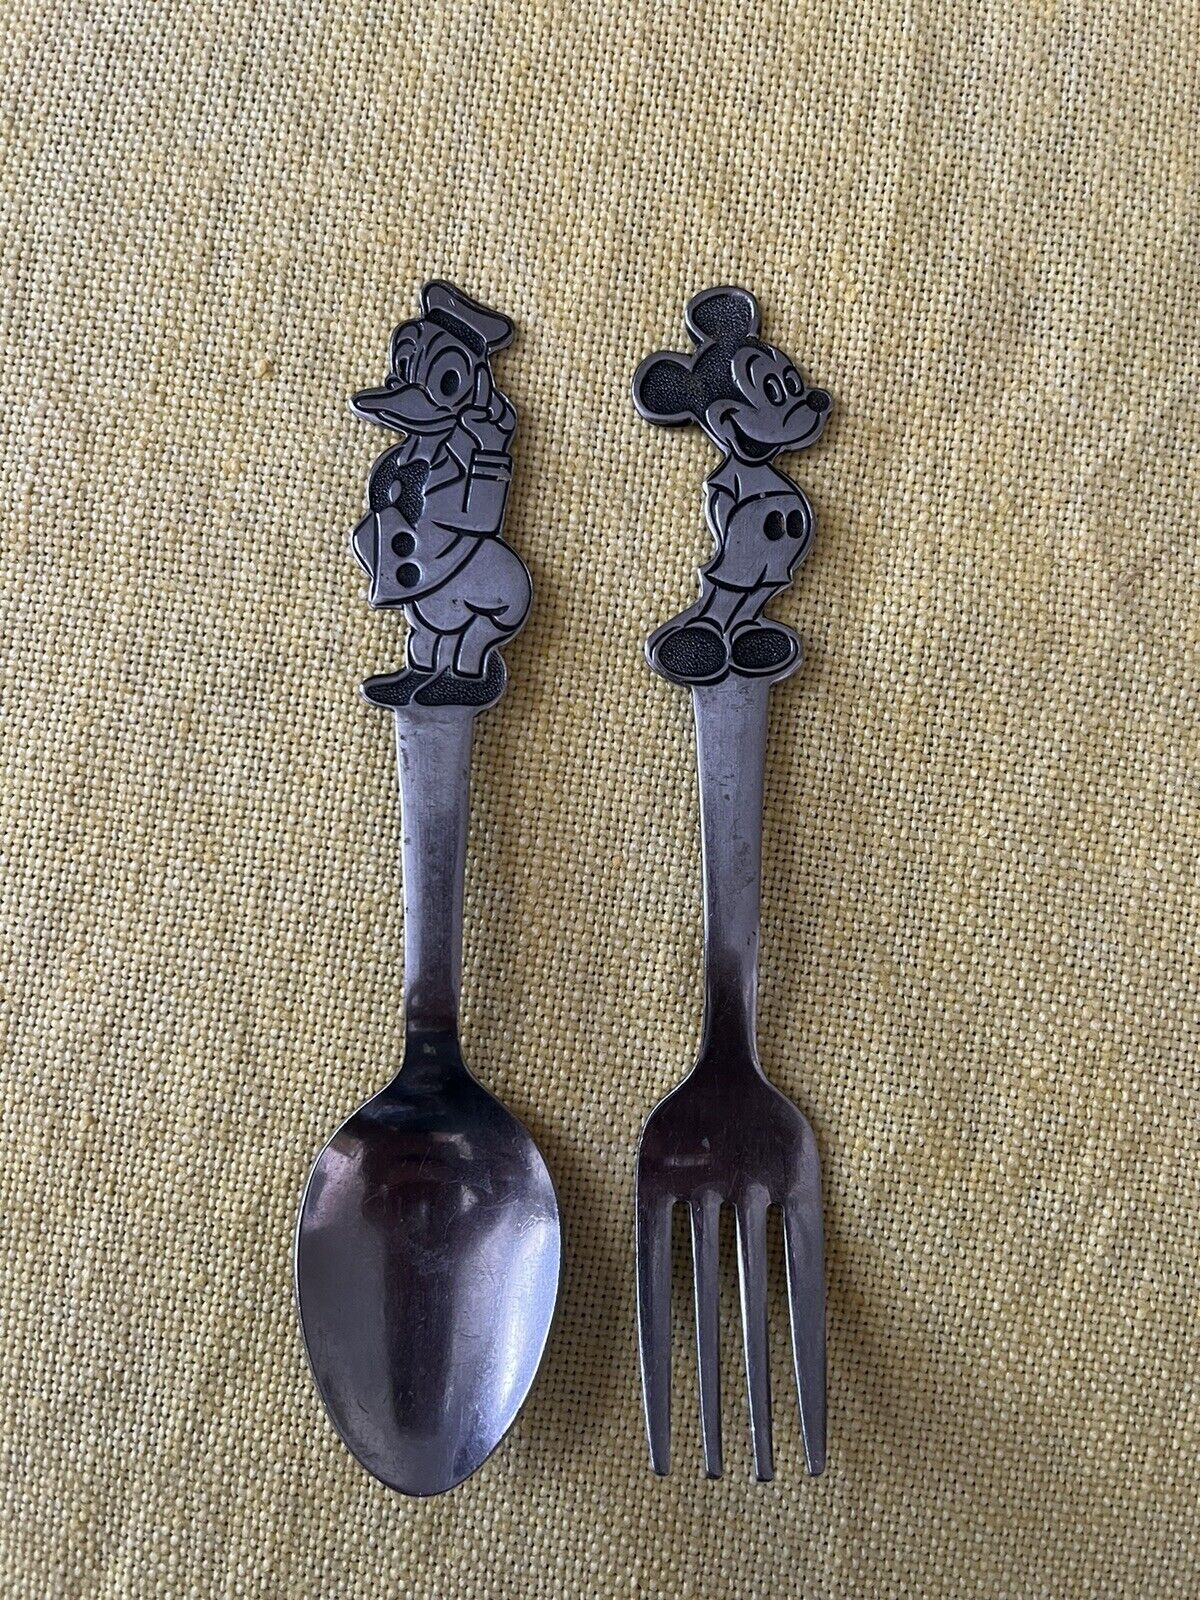 Walt Disney Stainless Child\'s Fork & Spoon By Bonny, Mickey Mouse & Donald Duck